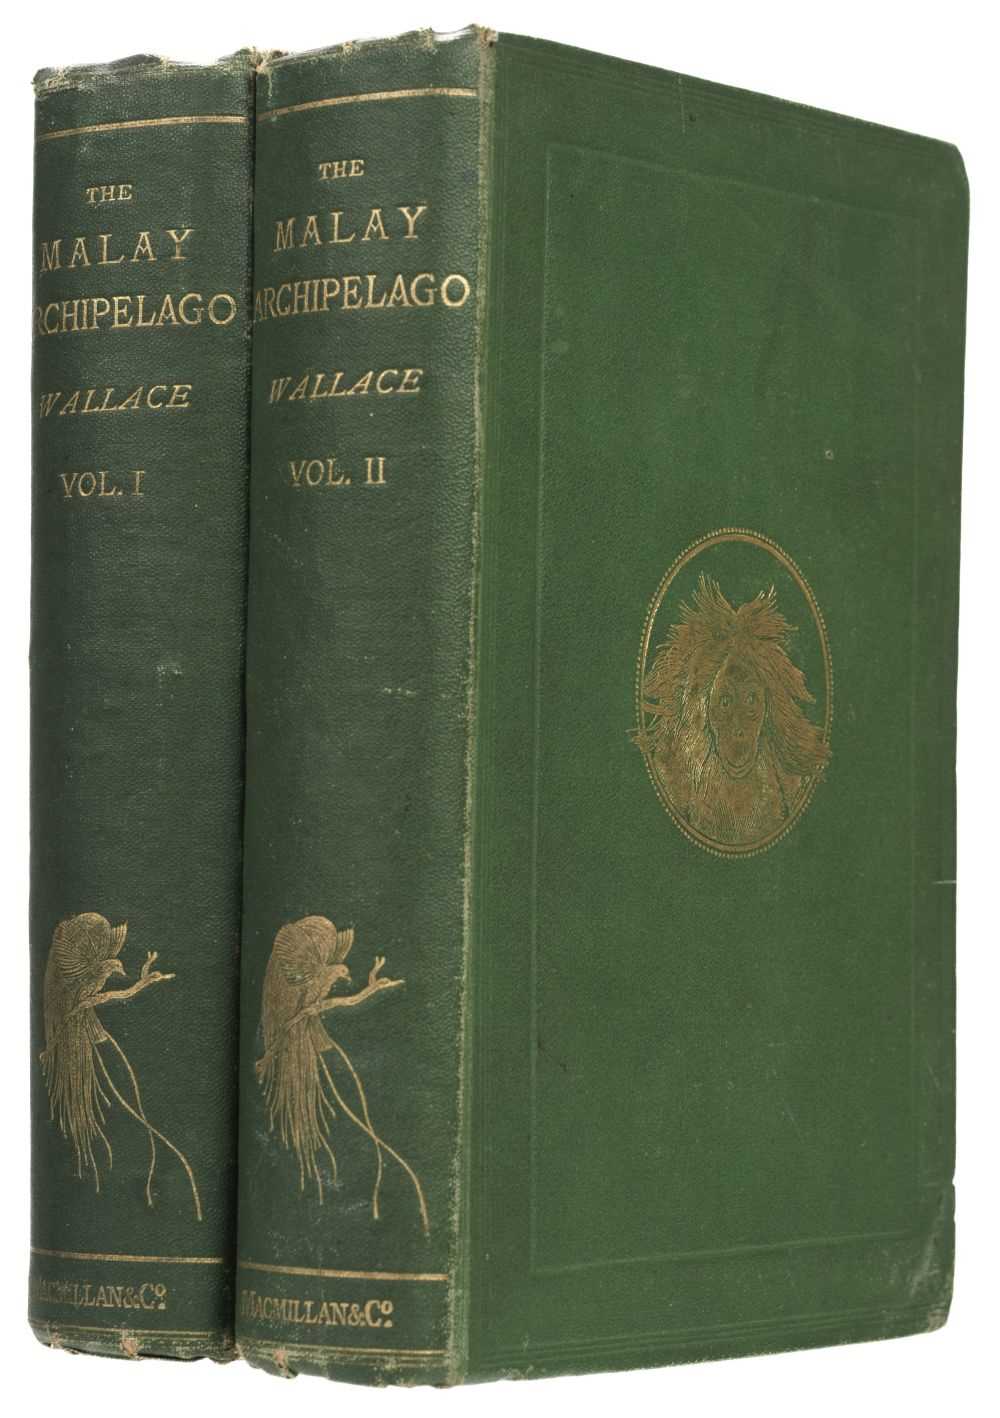 Lot 621 - Wallace (Alfred Russe). The Malay Archipelago, 2 volumes, 1st edition, 1869